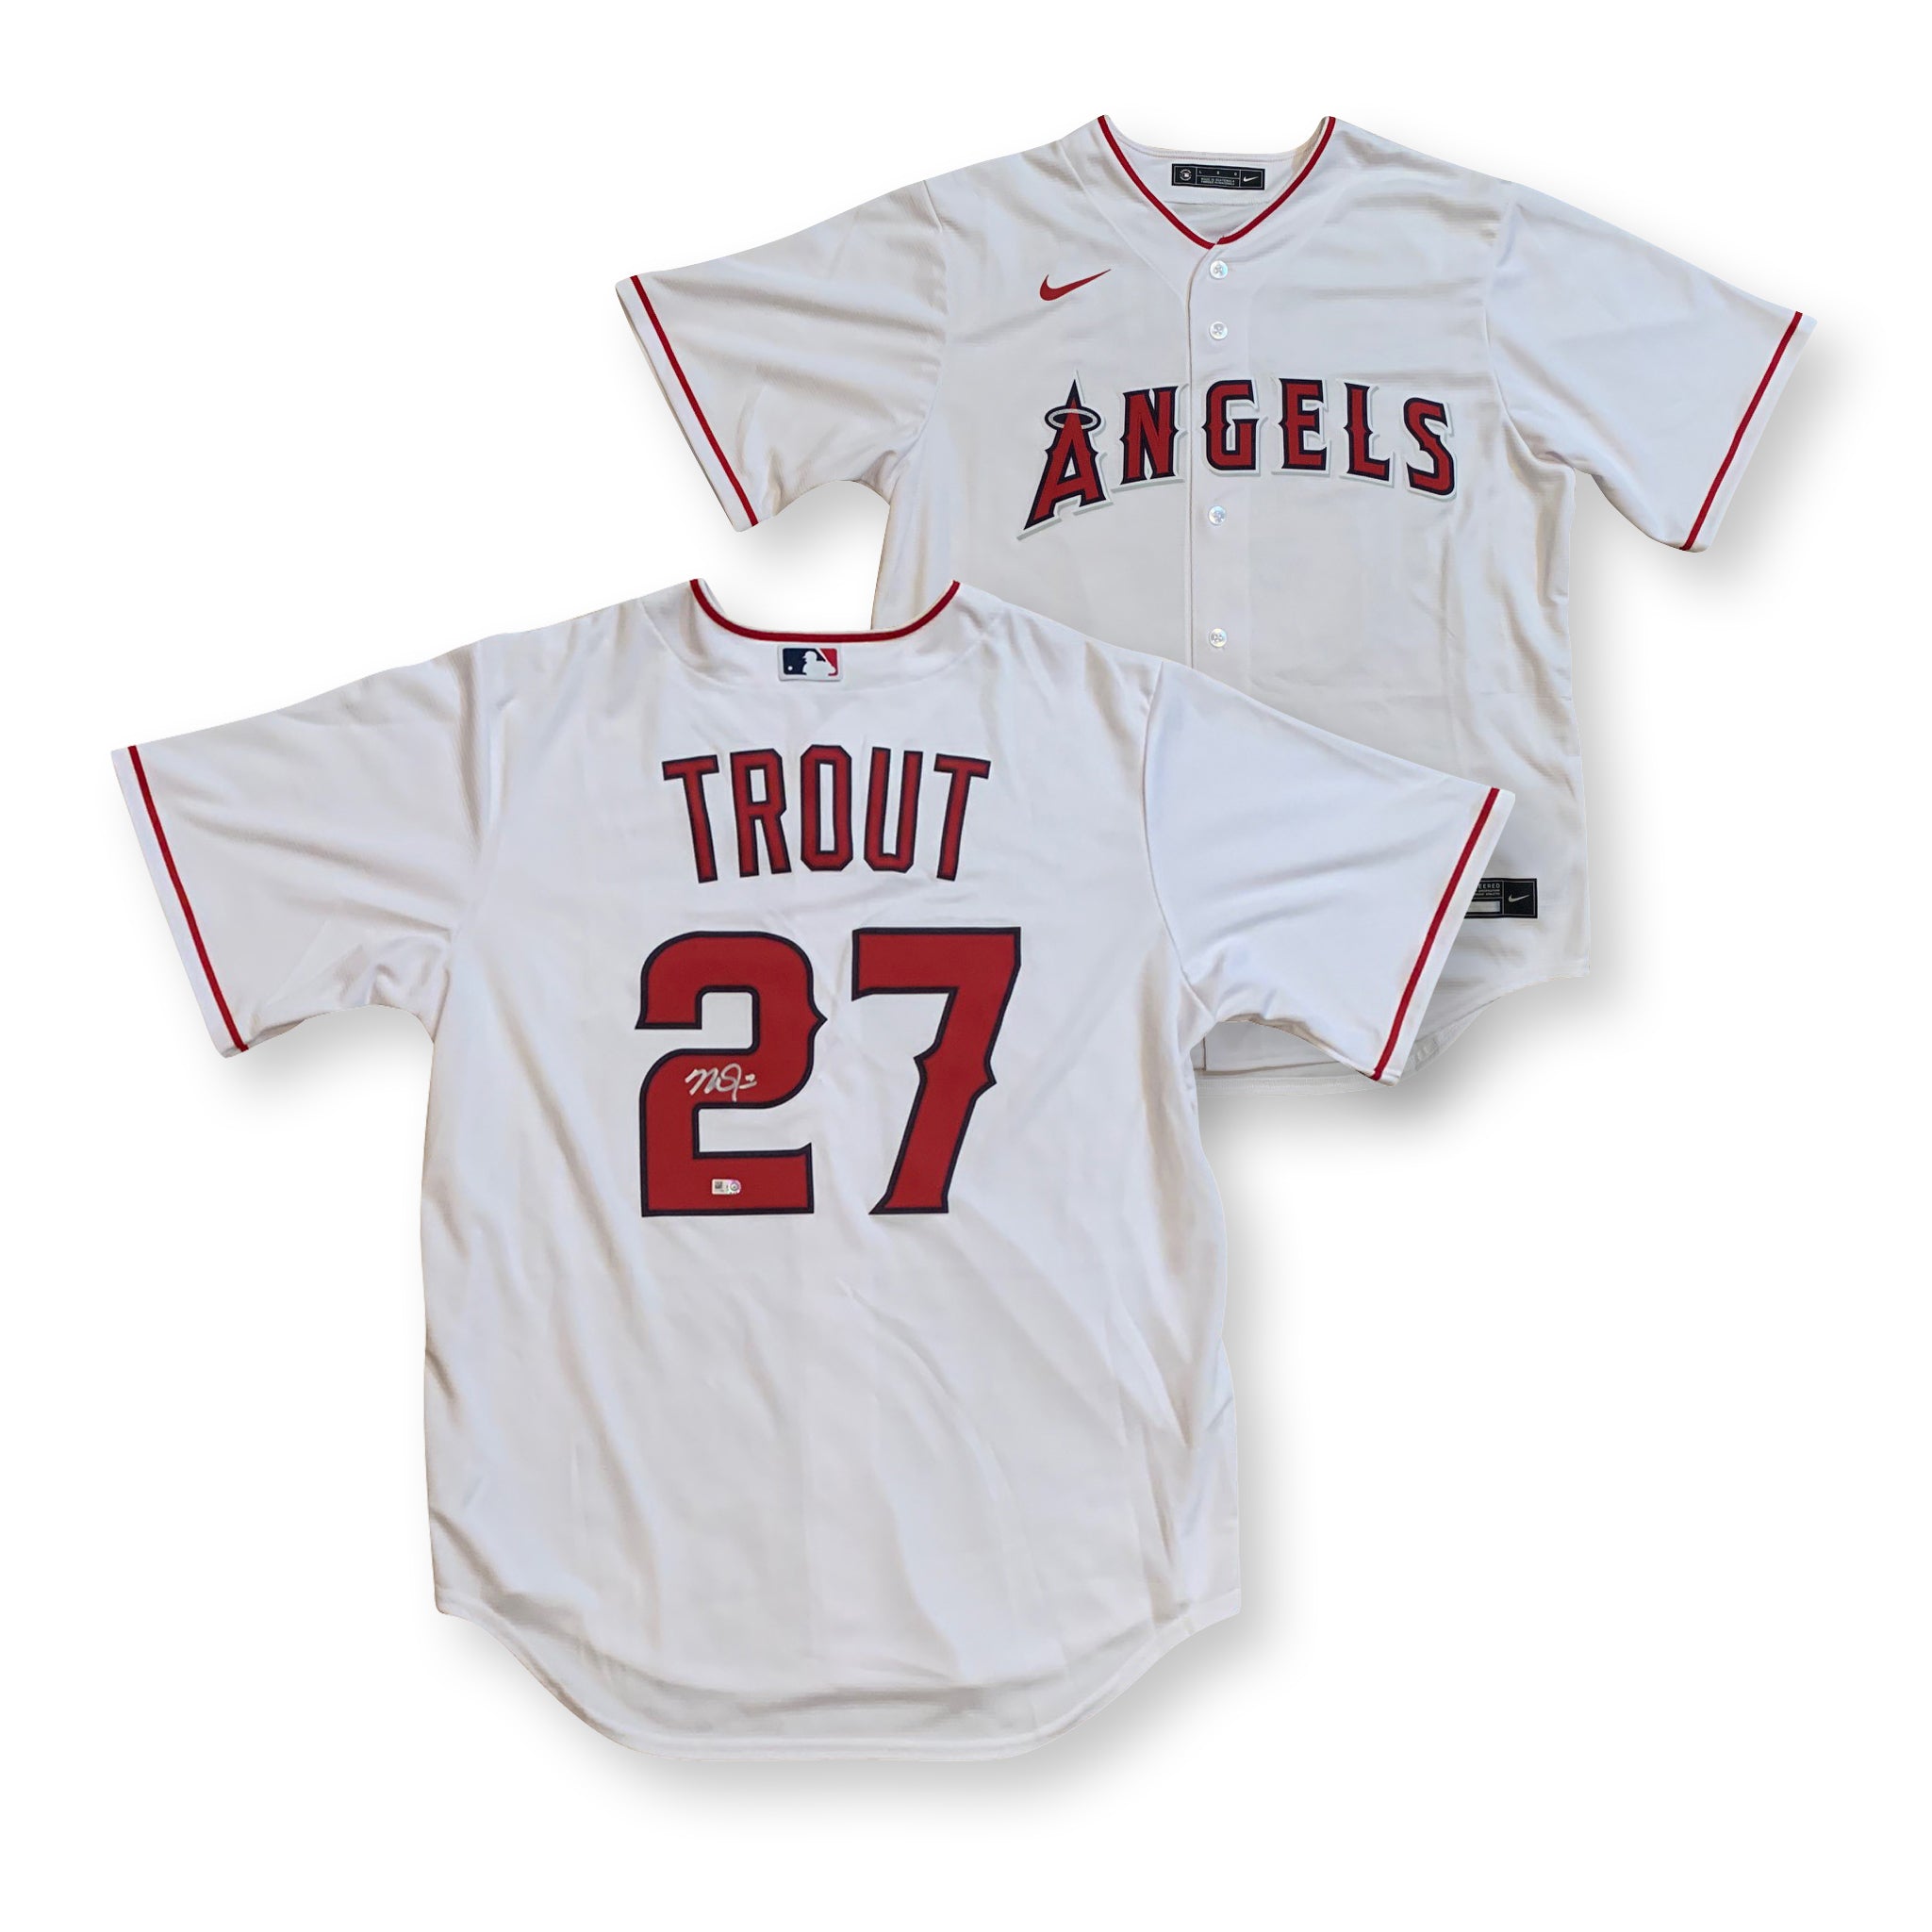 Mike Trout Autographed Los Angeles Baseball Jersey MLB Authenticated C